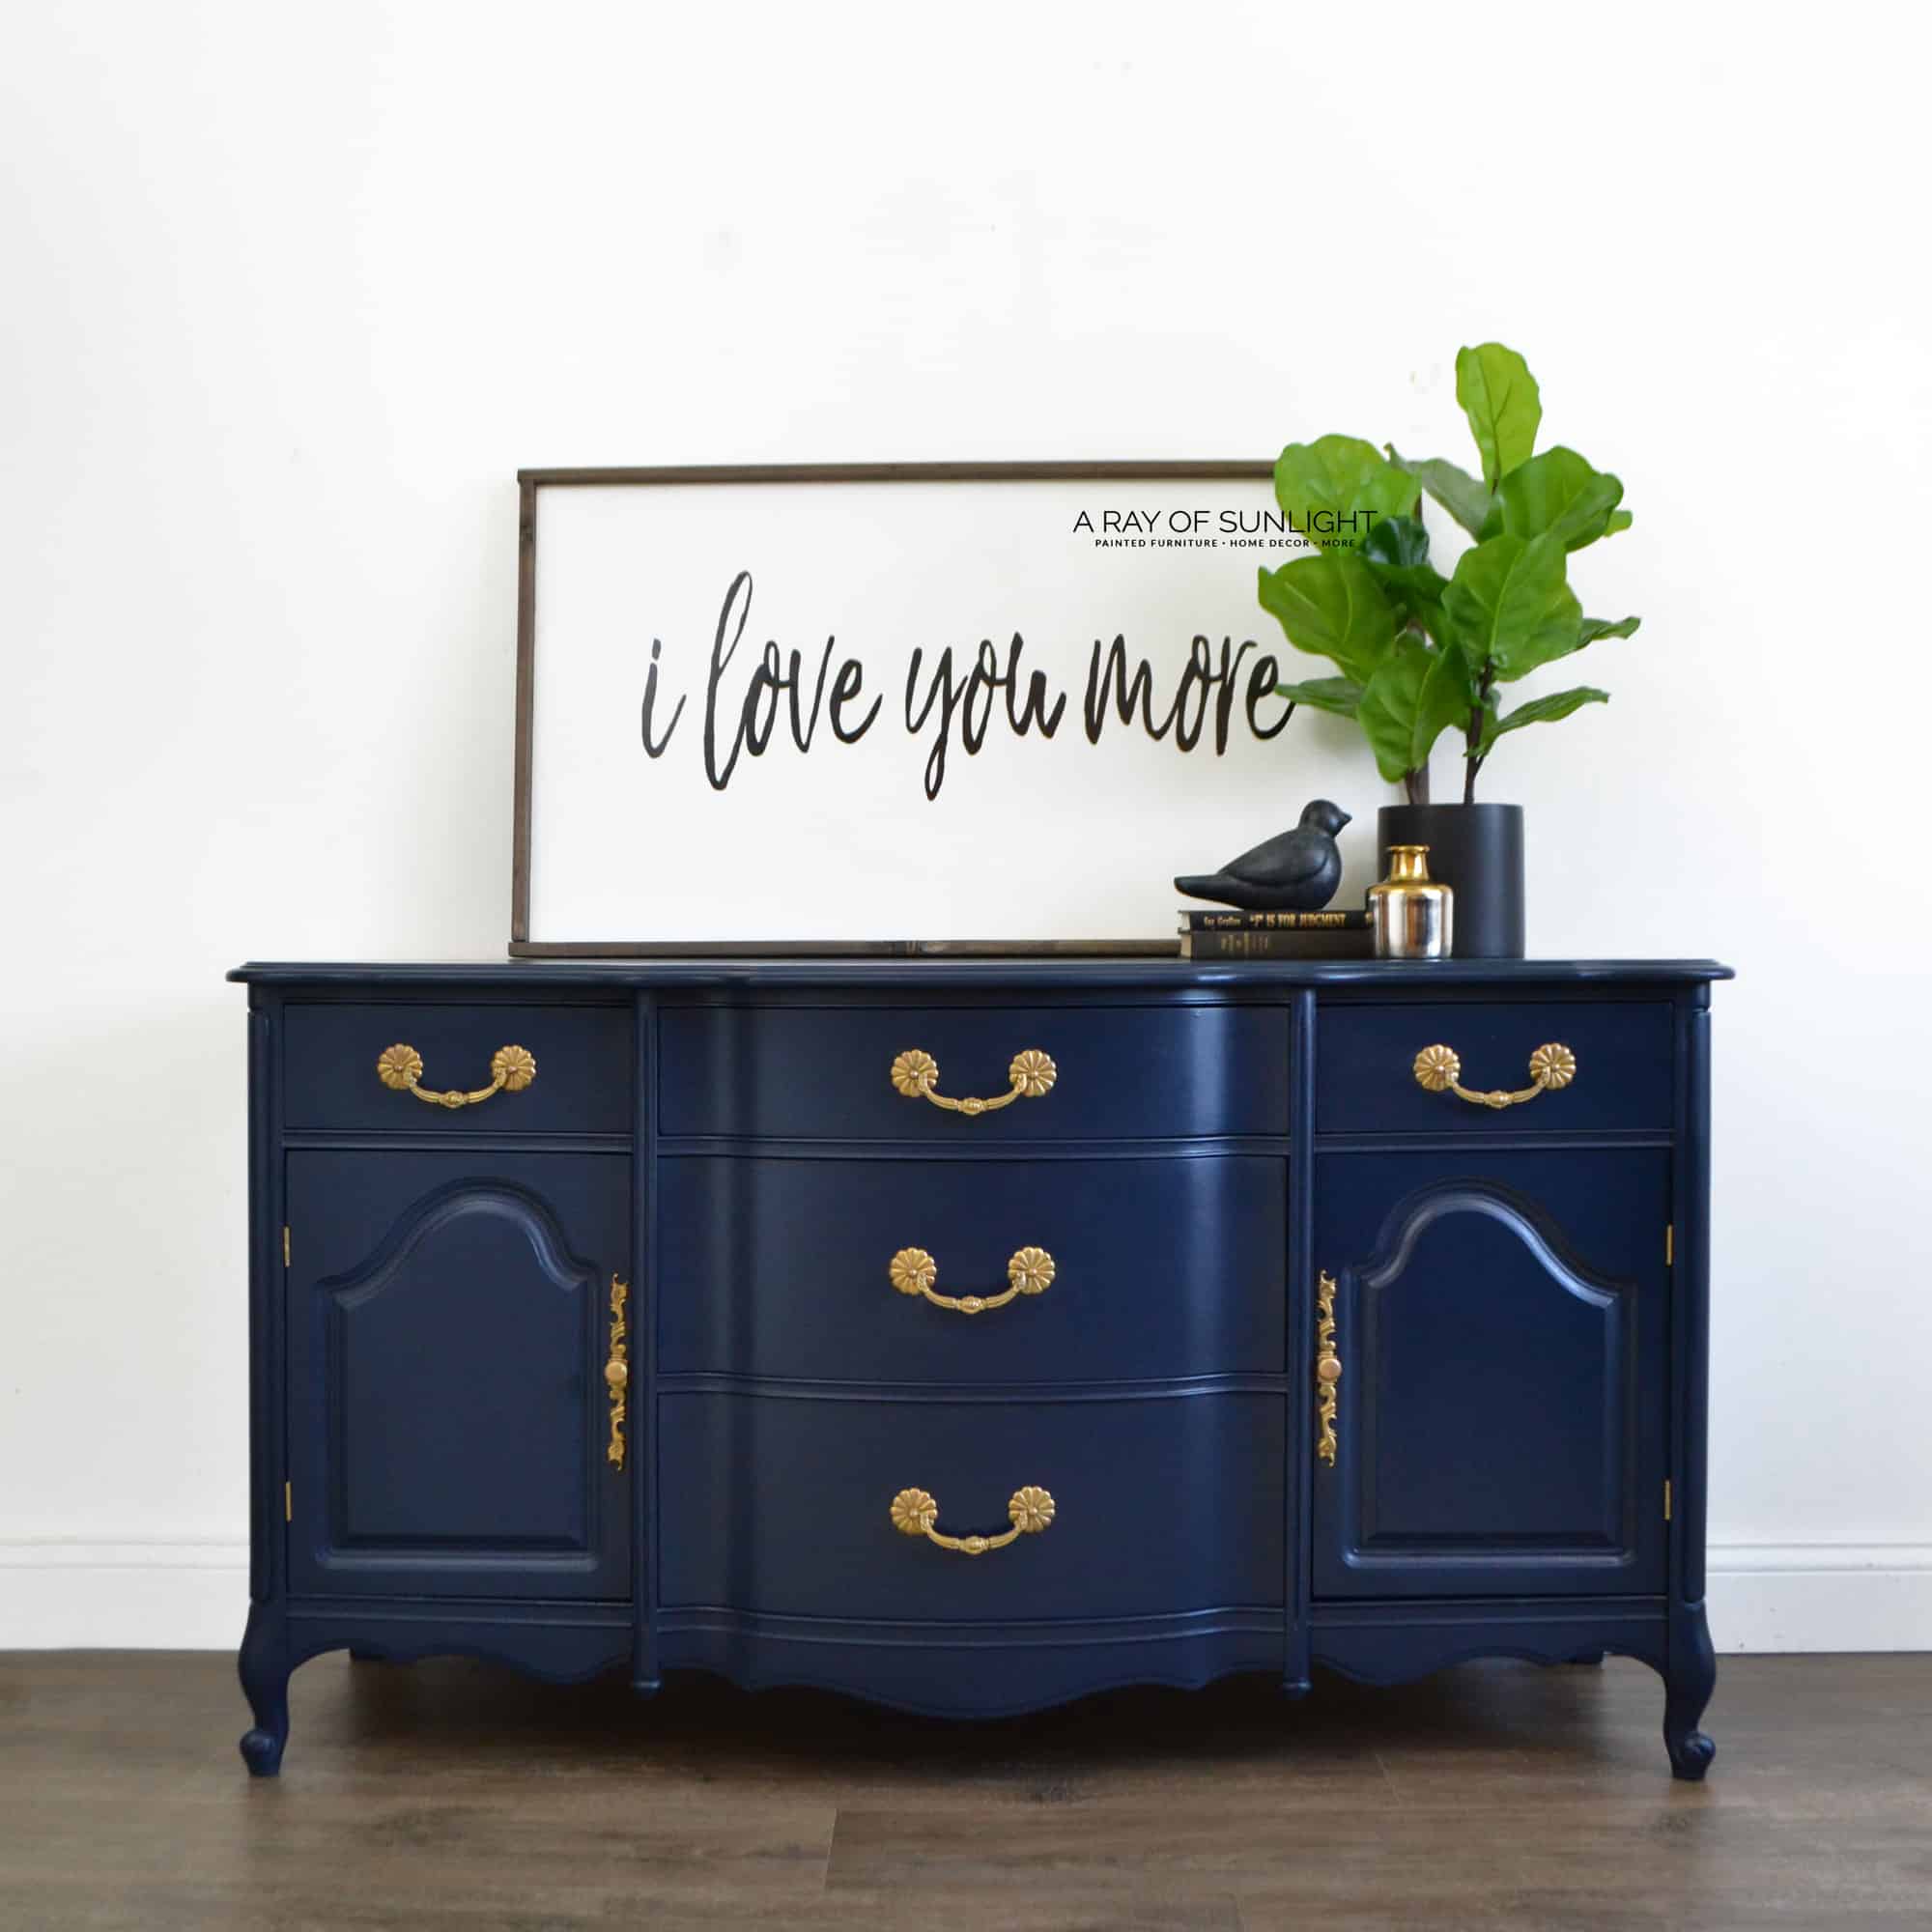 How to Paint Furniture: The Beginners Guide